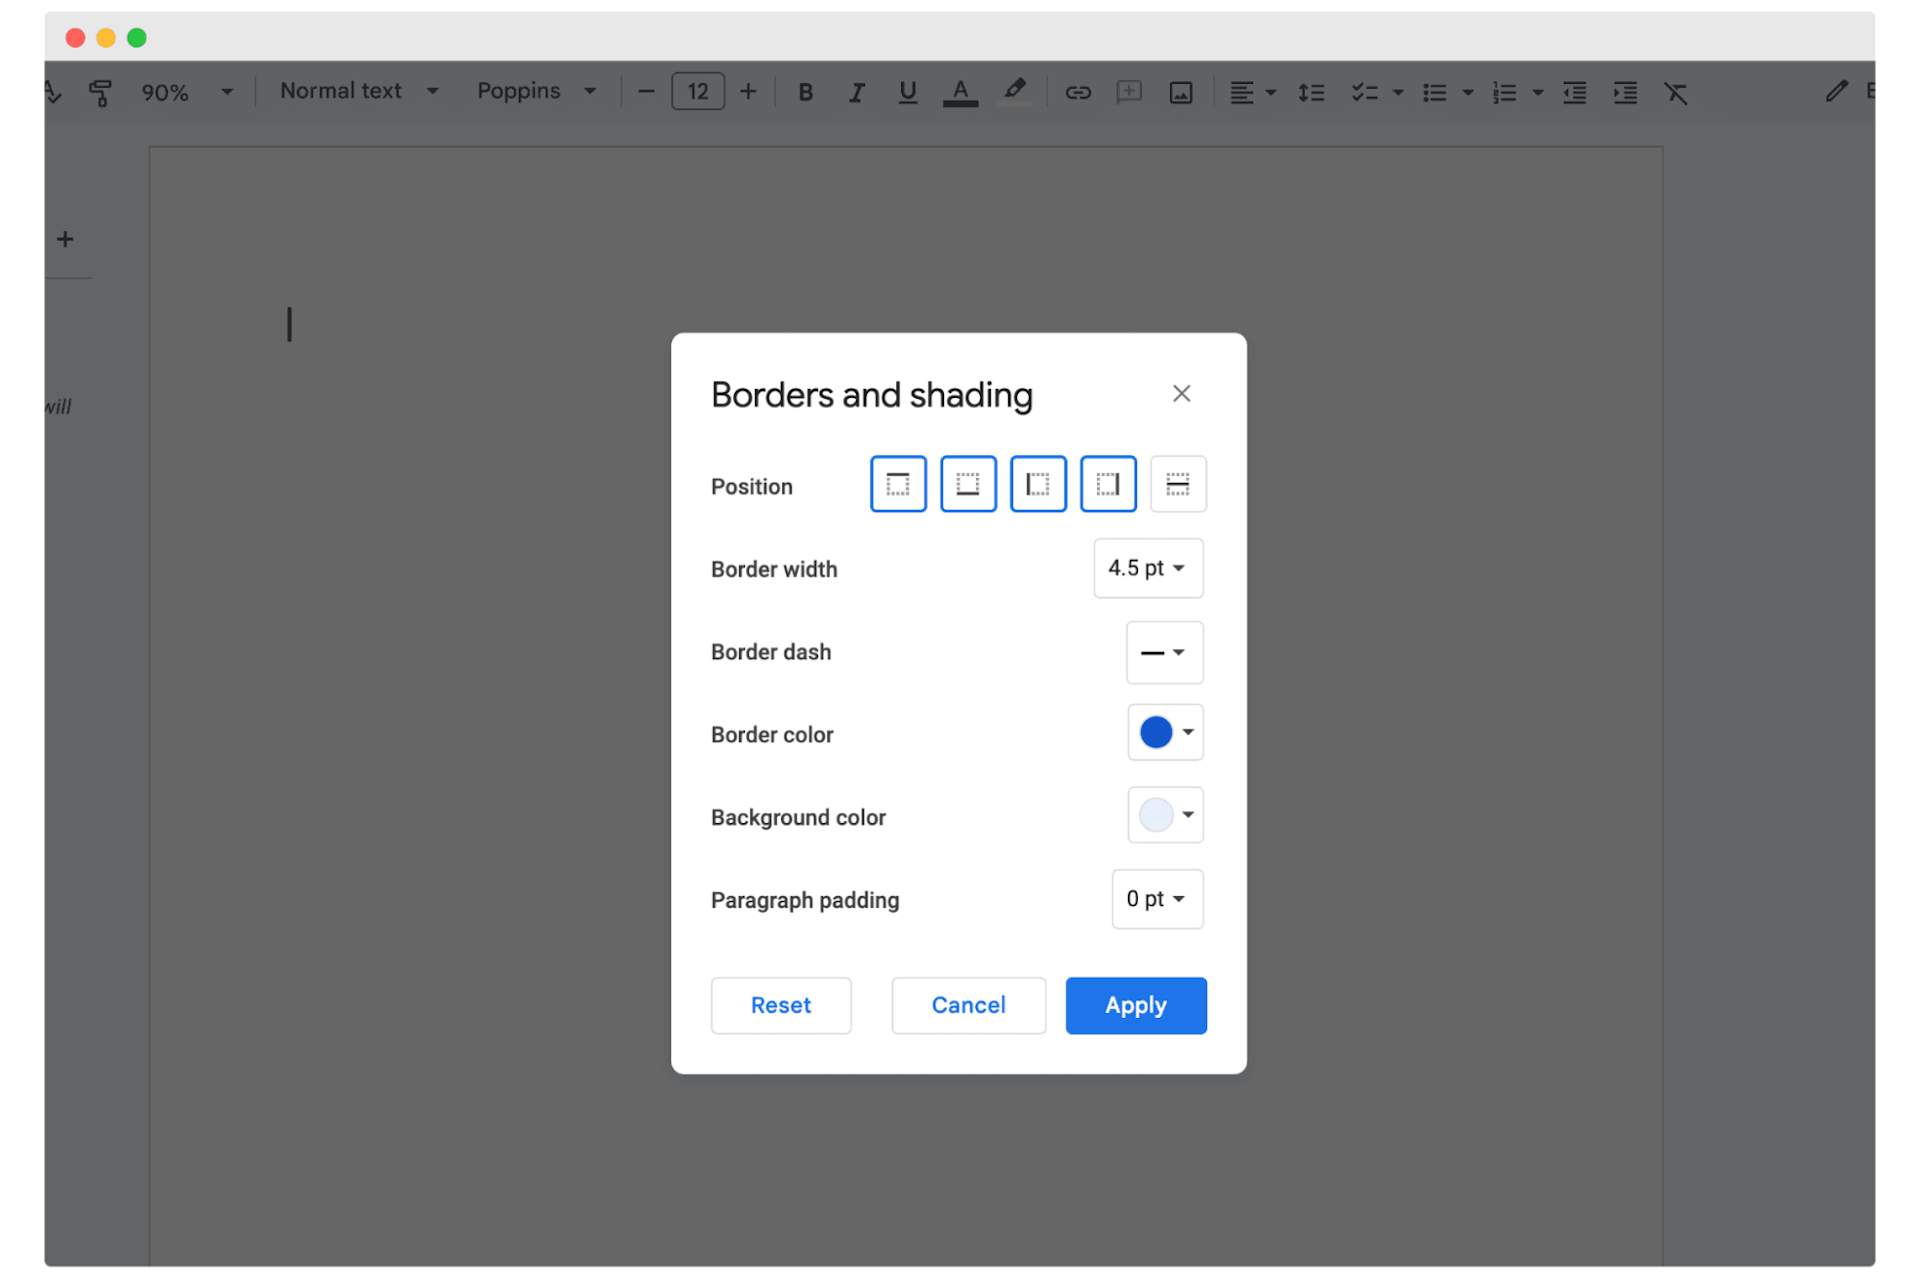 Borders and shading window in Google Docs.